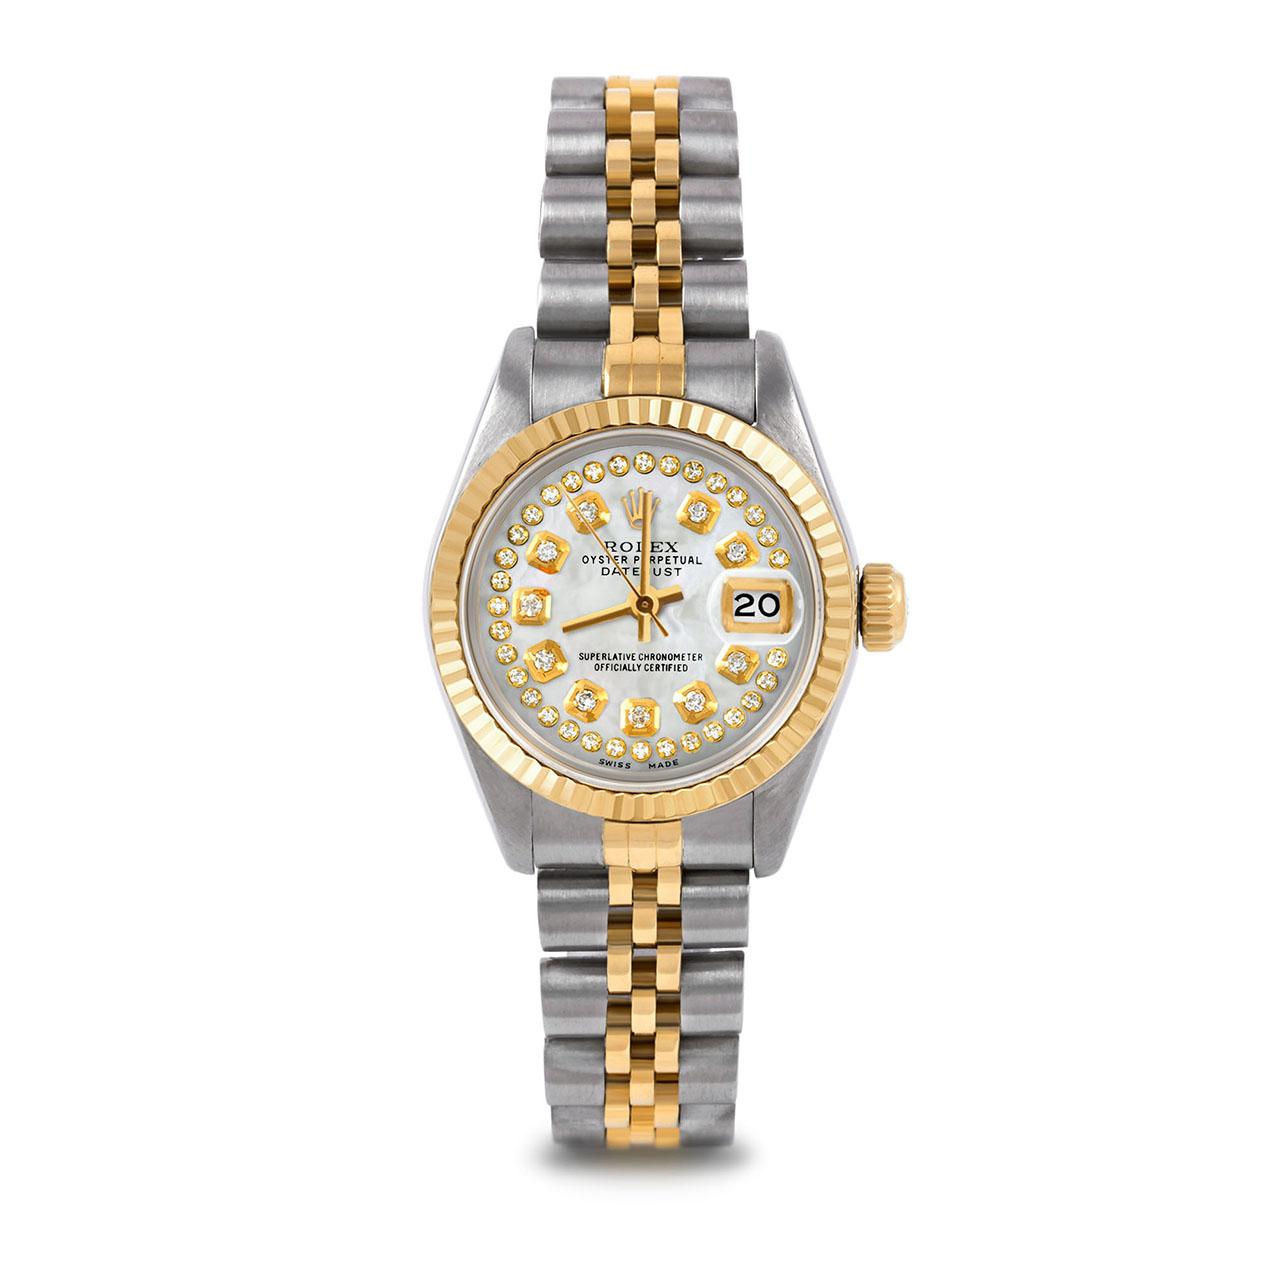 Pre-Owned Rolex 6917 Ladies 26mm Two Tone Datejust Watch, Custom White Mother of Pearl String Diamond Dial & Fluted Bezel on Rolex 14K Yellow Gold And Stainless Steel Jubilee Band.   

SKU 6917-TT-WMOP-STRD-FLT-JBL


Brand/Model:        Rolex